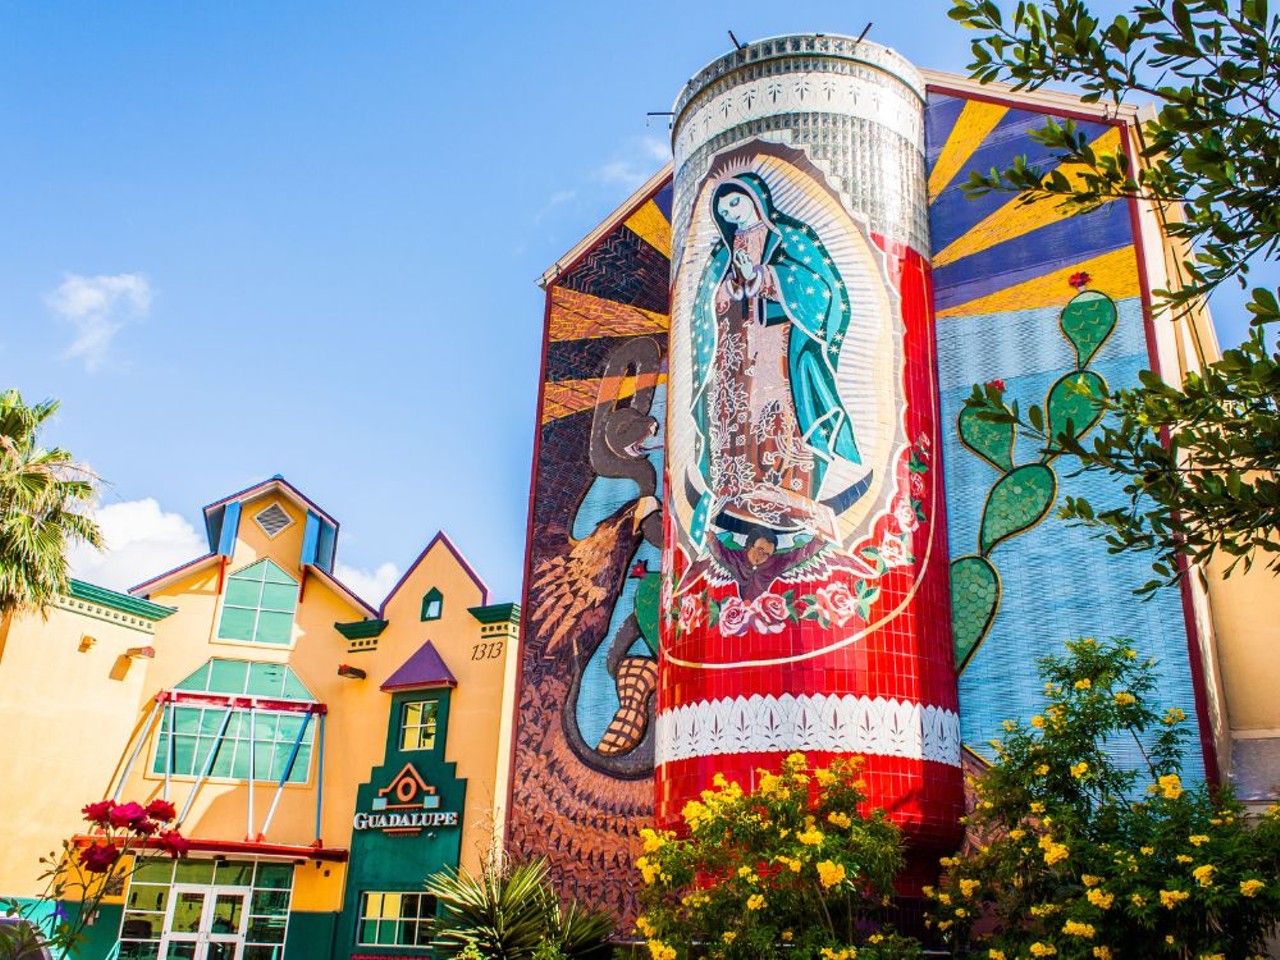 La Veladora of Our Lady of Guadalupe
1301 Guadalupe St., San Antonio
Located at Plaza Guadalupe, Jesse Treviño's La Veladora of Our Lady of Guadalupe is mixed media mural featuring a 3D votive candle with an eternal flame facing Guadalupe Street. It is said to be the world's largest Virgin Mary mosaic.